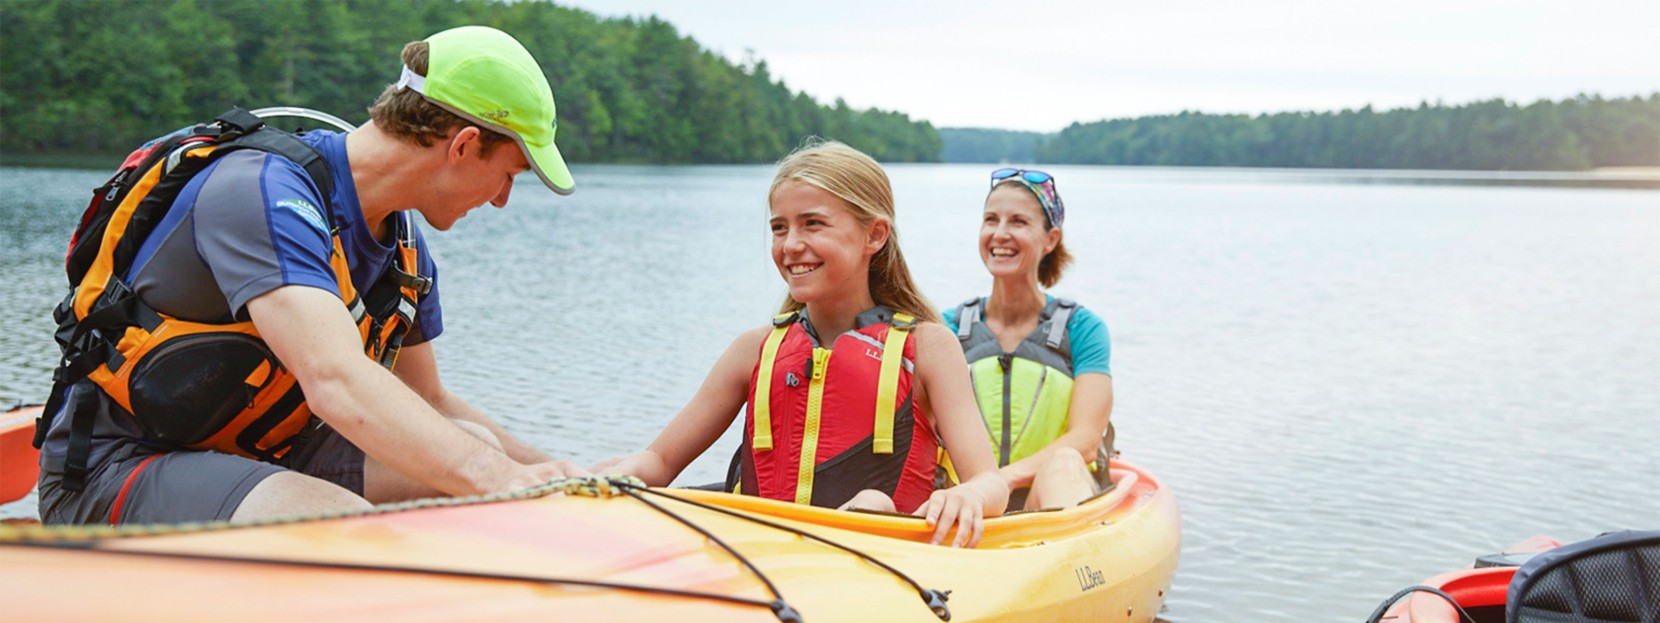 A mother and daughter learning how to launch a kayak.